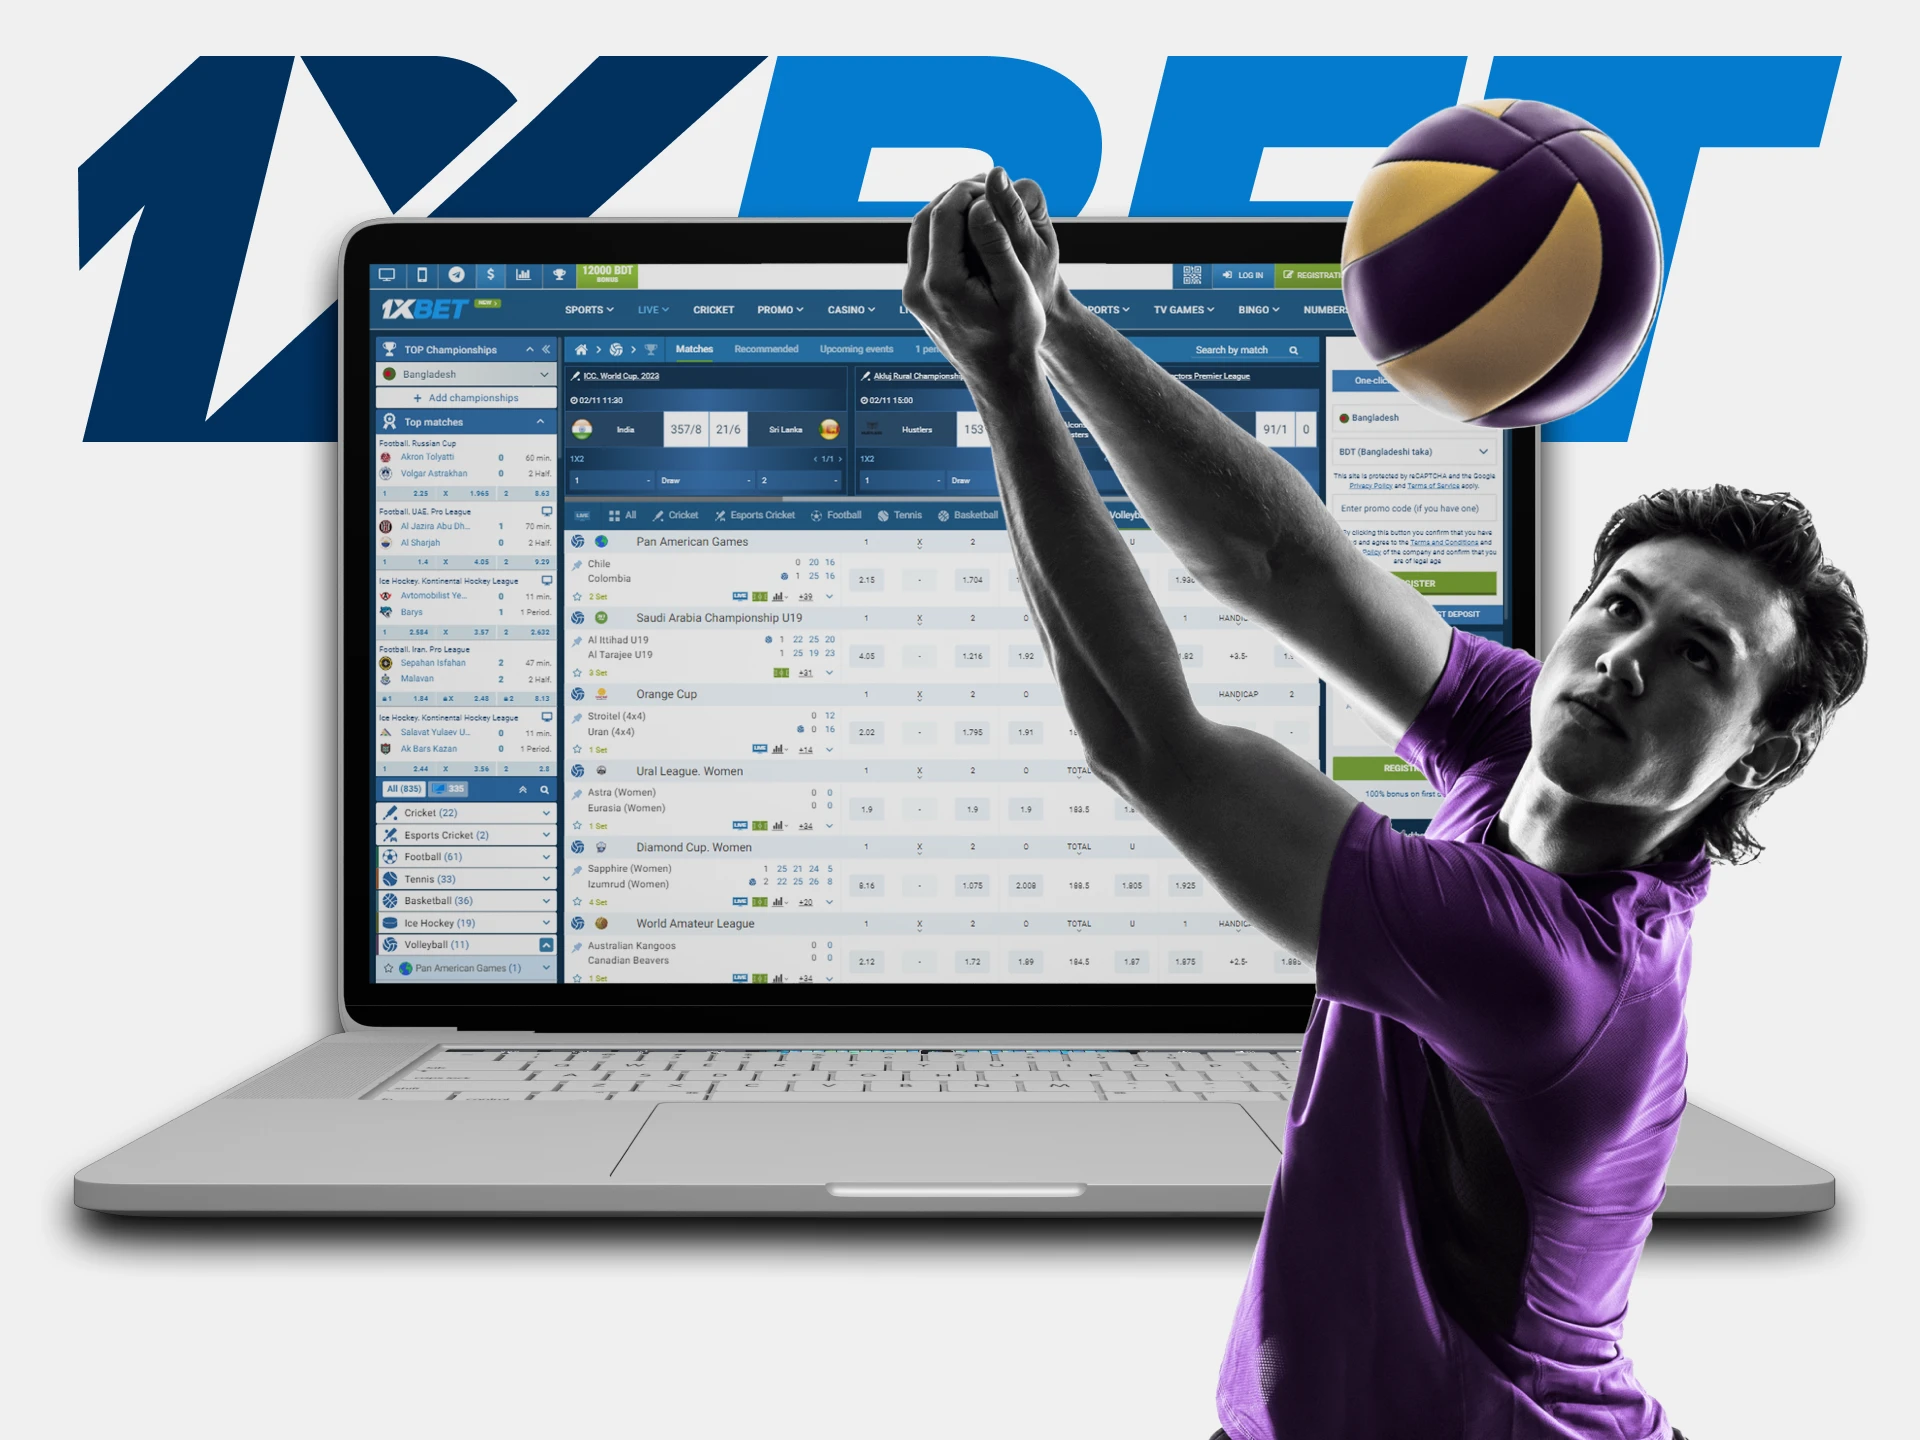 Register an account at 1xBet to bet on volleyball online.